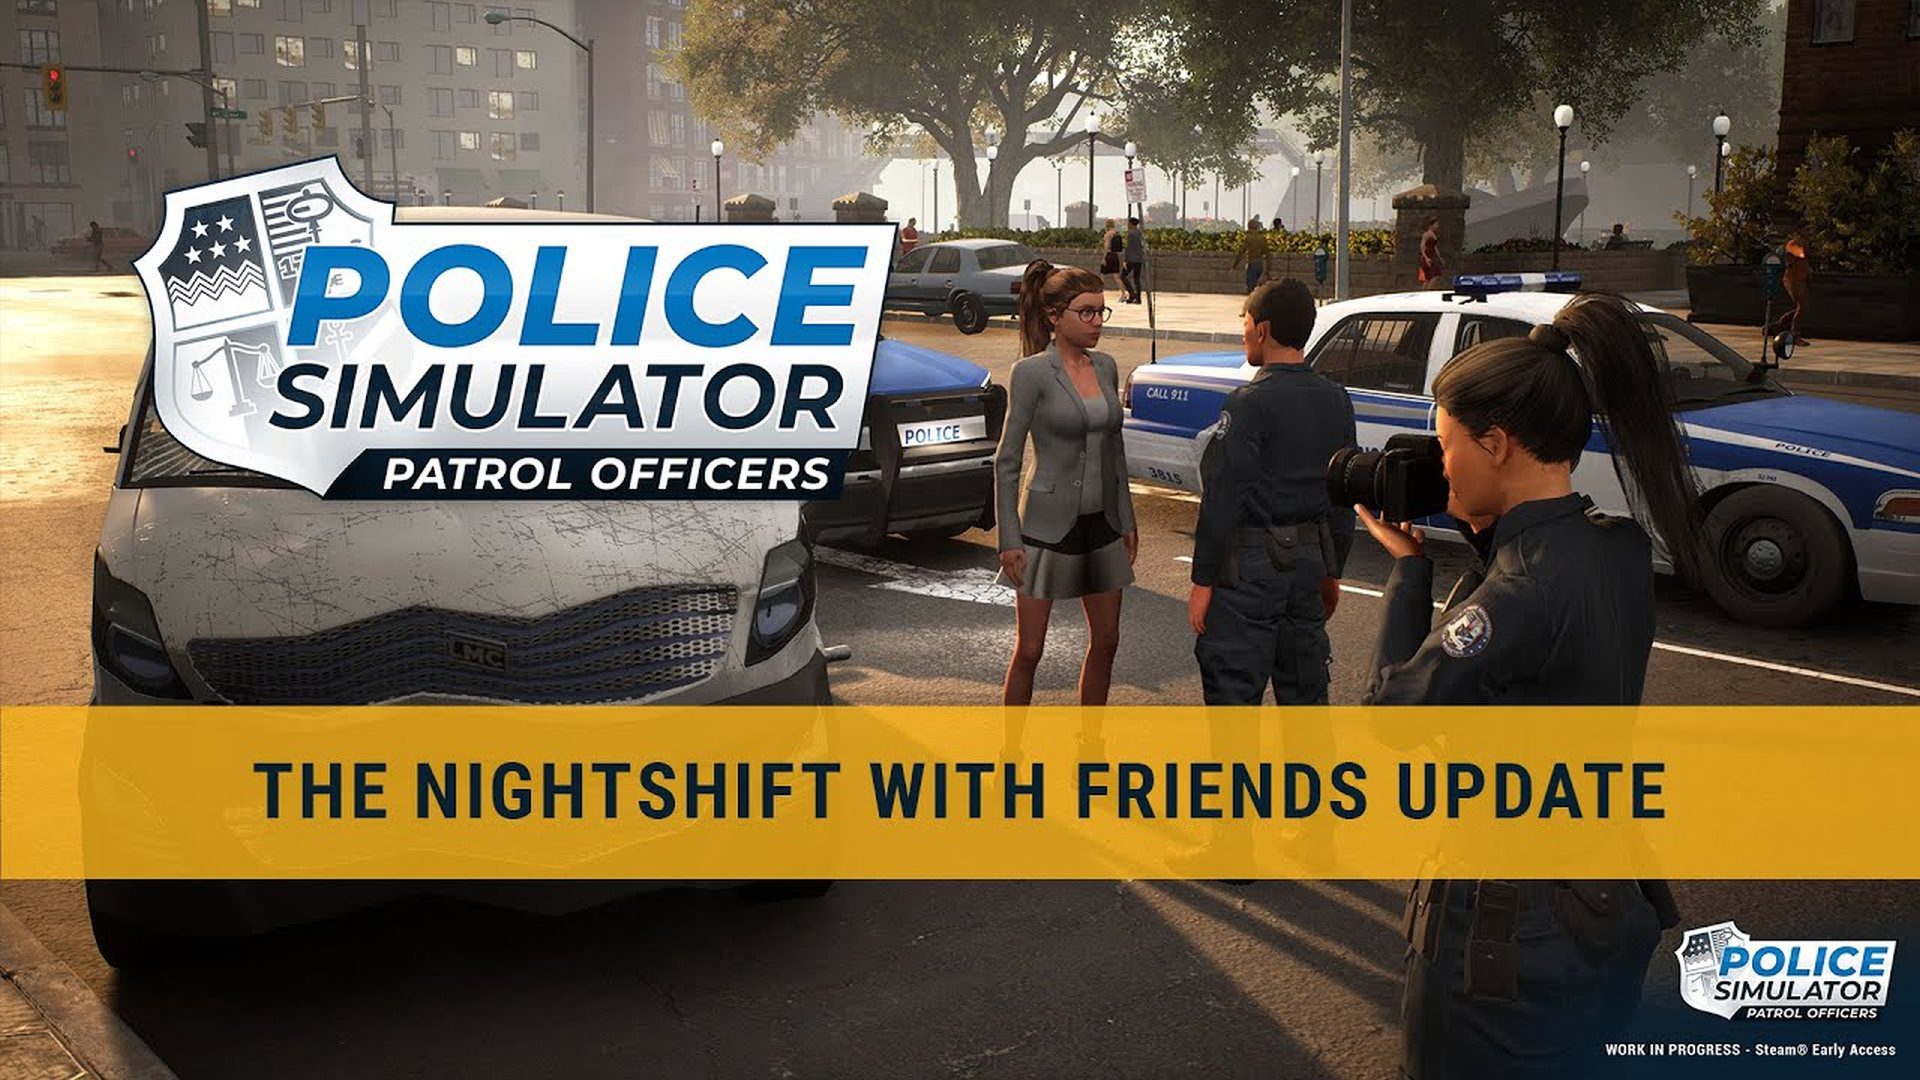 Police Simulator: Patrol Officers - Nightshift with Friends Update | astragon, Aesir Interactive